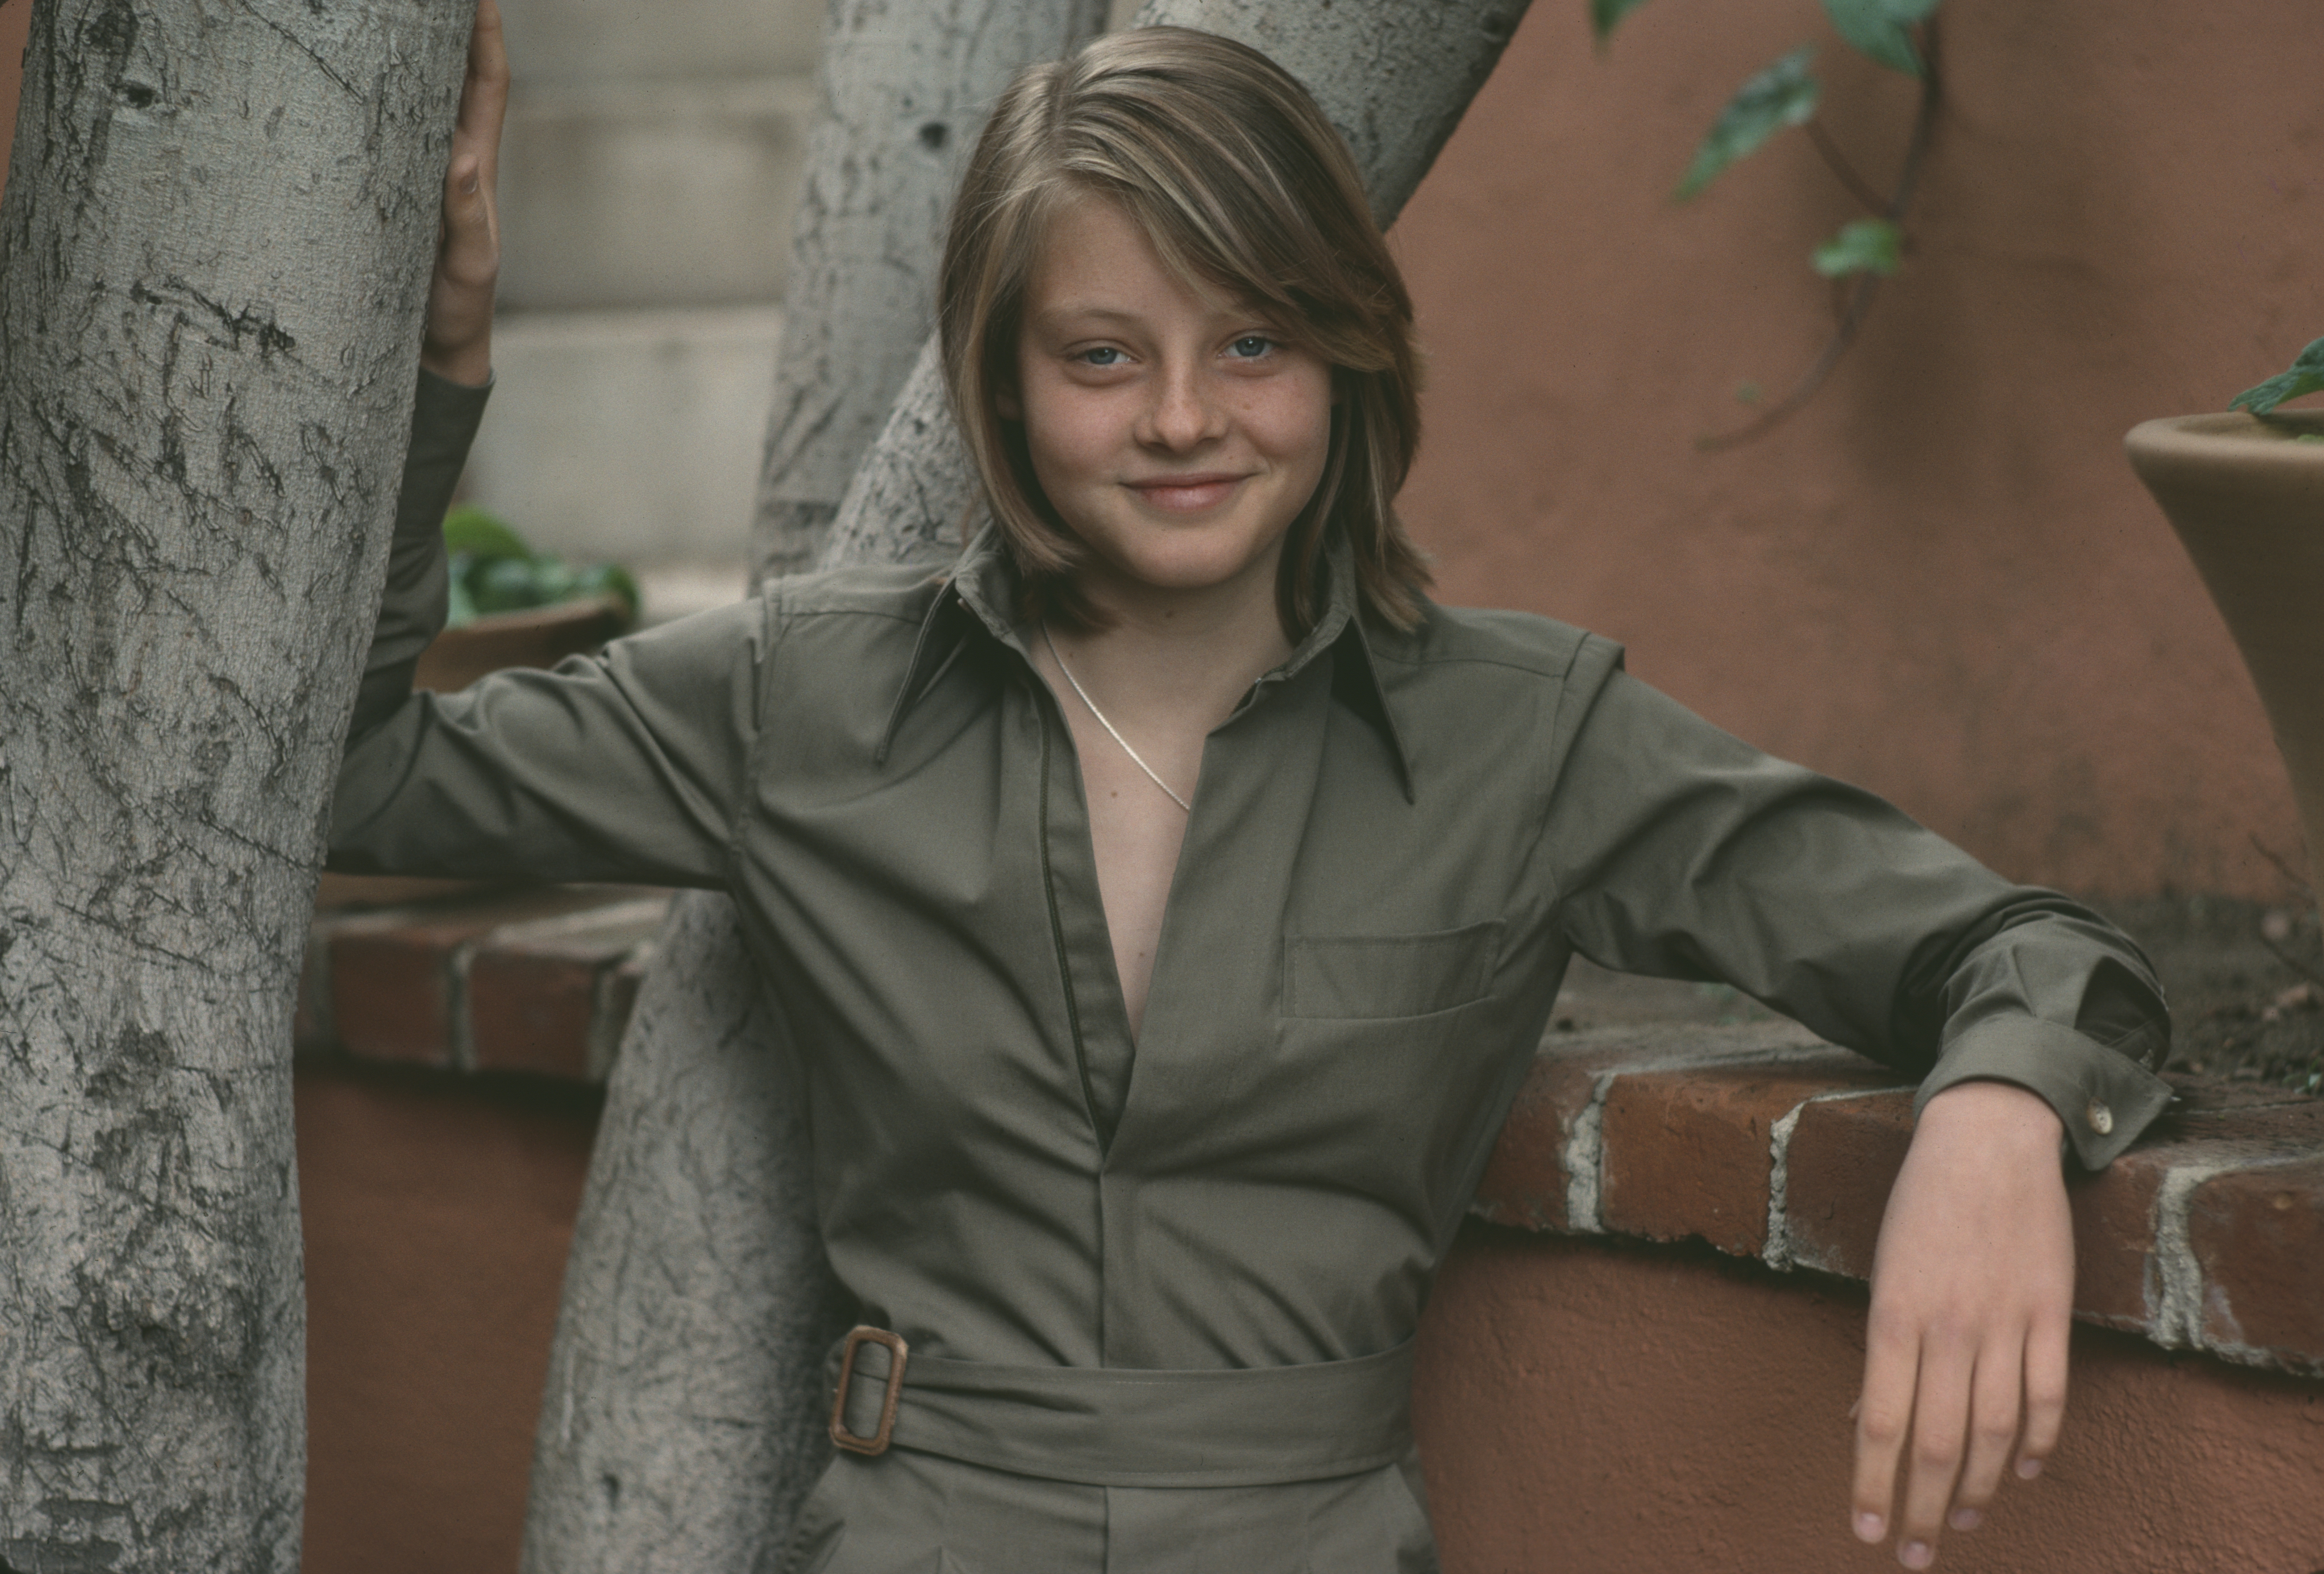 Jodie Foster posing for a picture when she was young in 1976 | Source: Getty Images